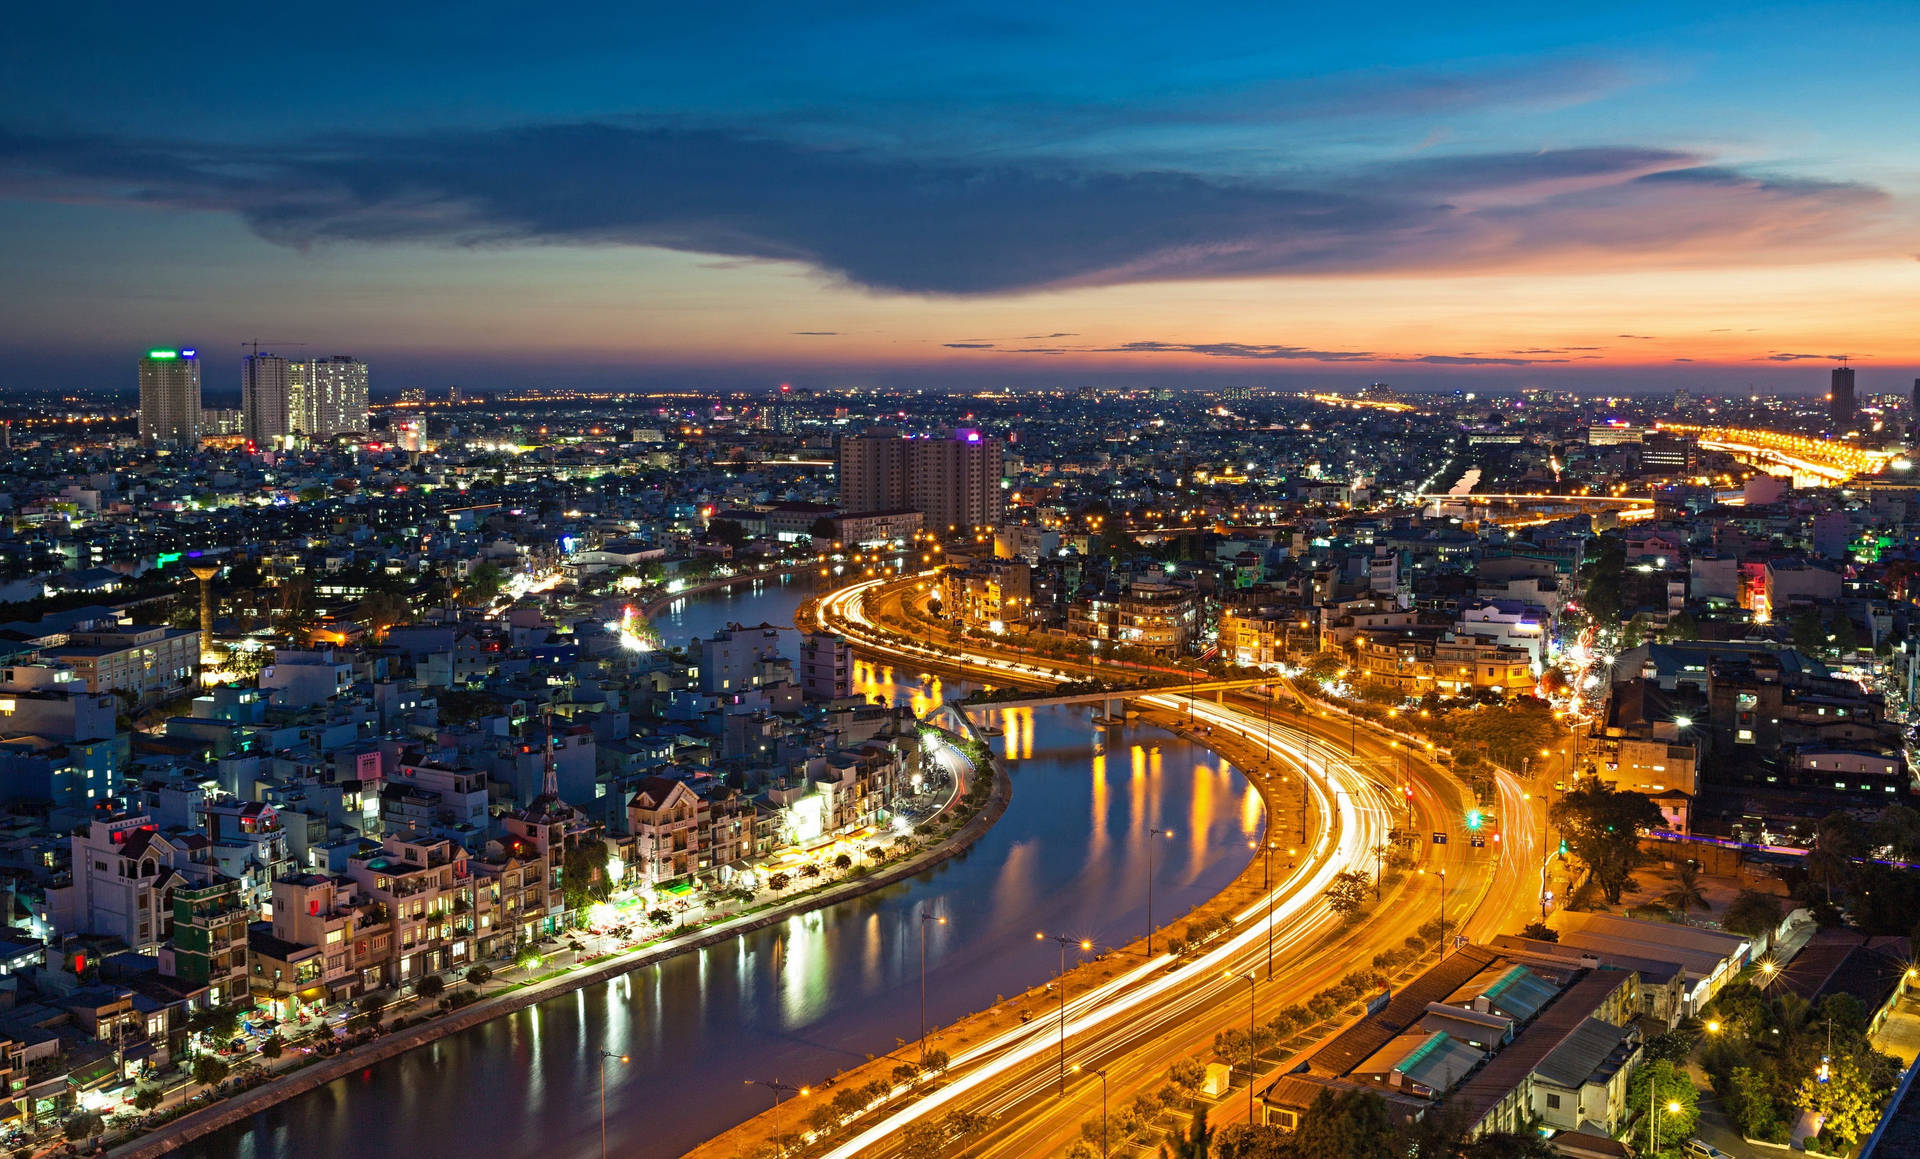 Saigon River And Night City View In Vietnam